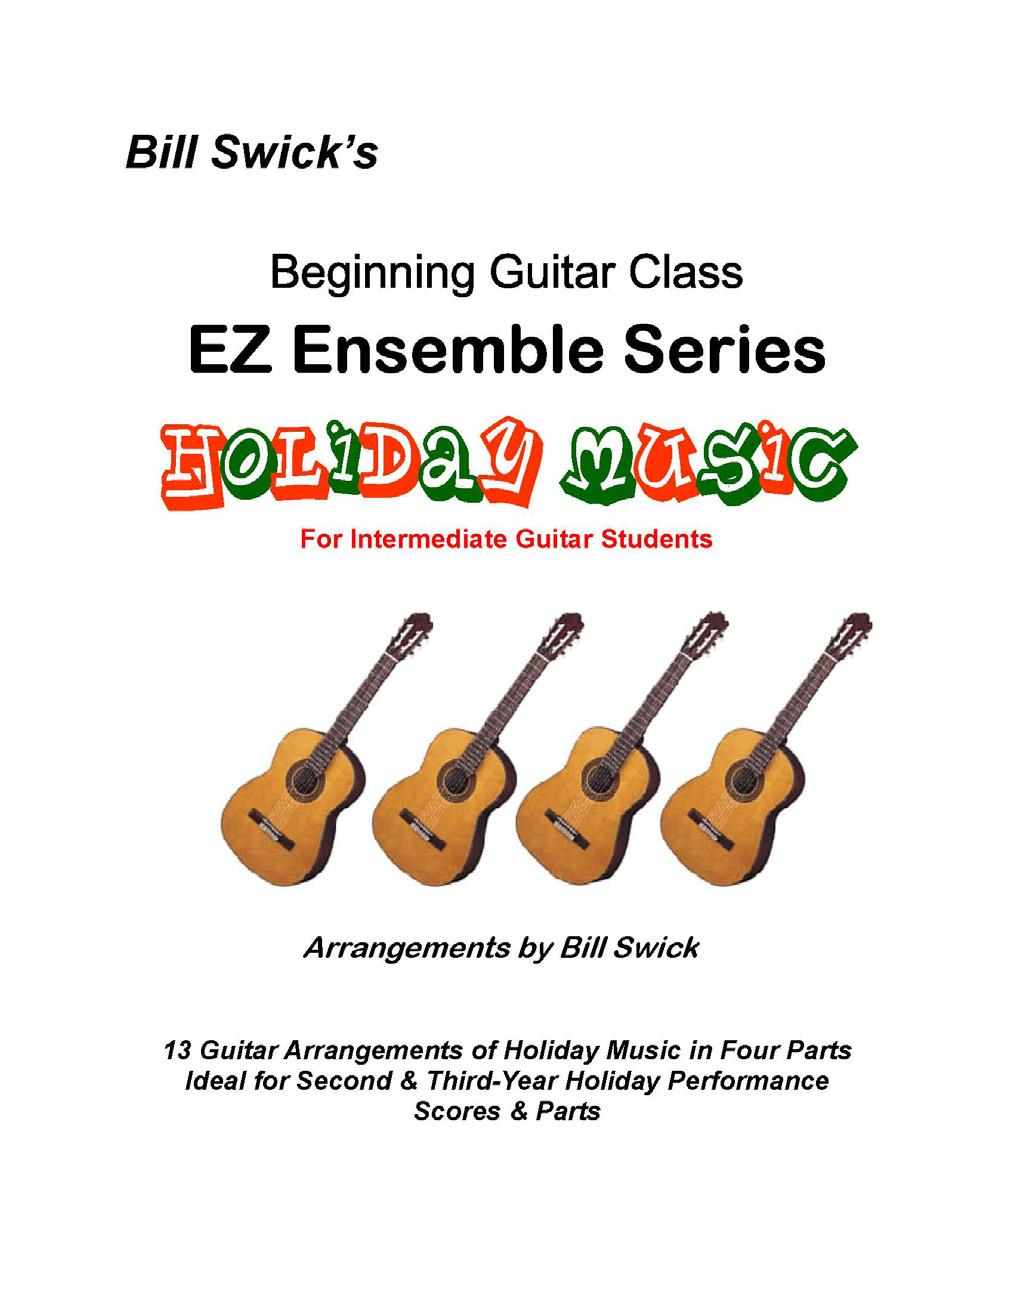 FREE! from wwwfreeguitarensemblemusiccom The following EZ Holiday Guitar Quartet is made available to you at no cost from freeguitarensemblemusiccom Try it Perform it If you like it and would like